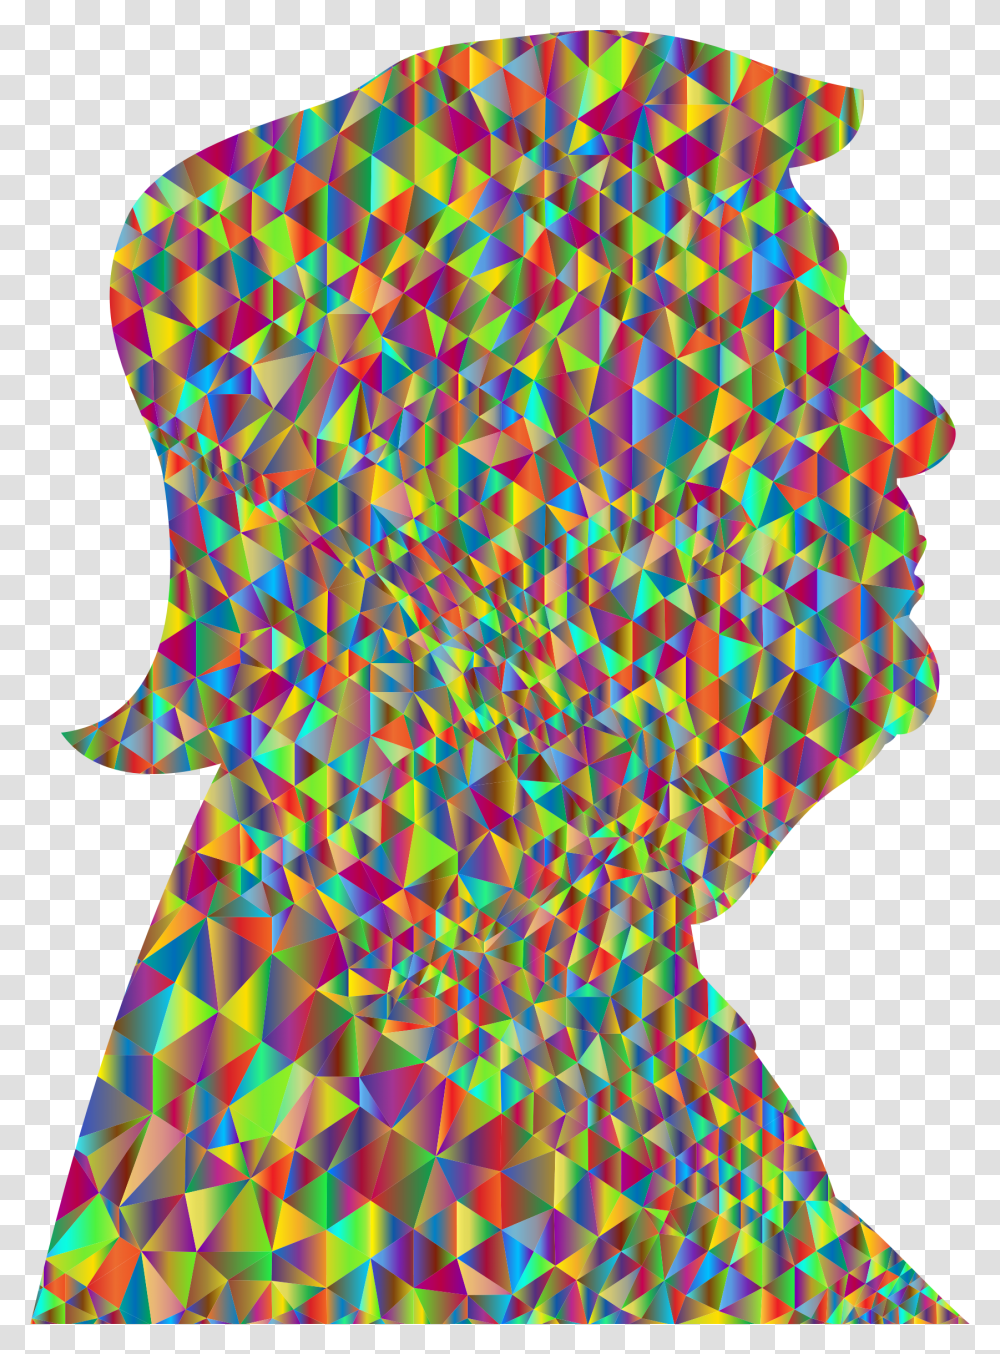 Polychromatic Low Poly Trump Profile Silhouette Clip Polychromatic, Modern Art Transparent Png